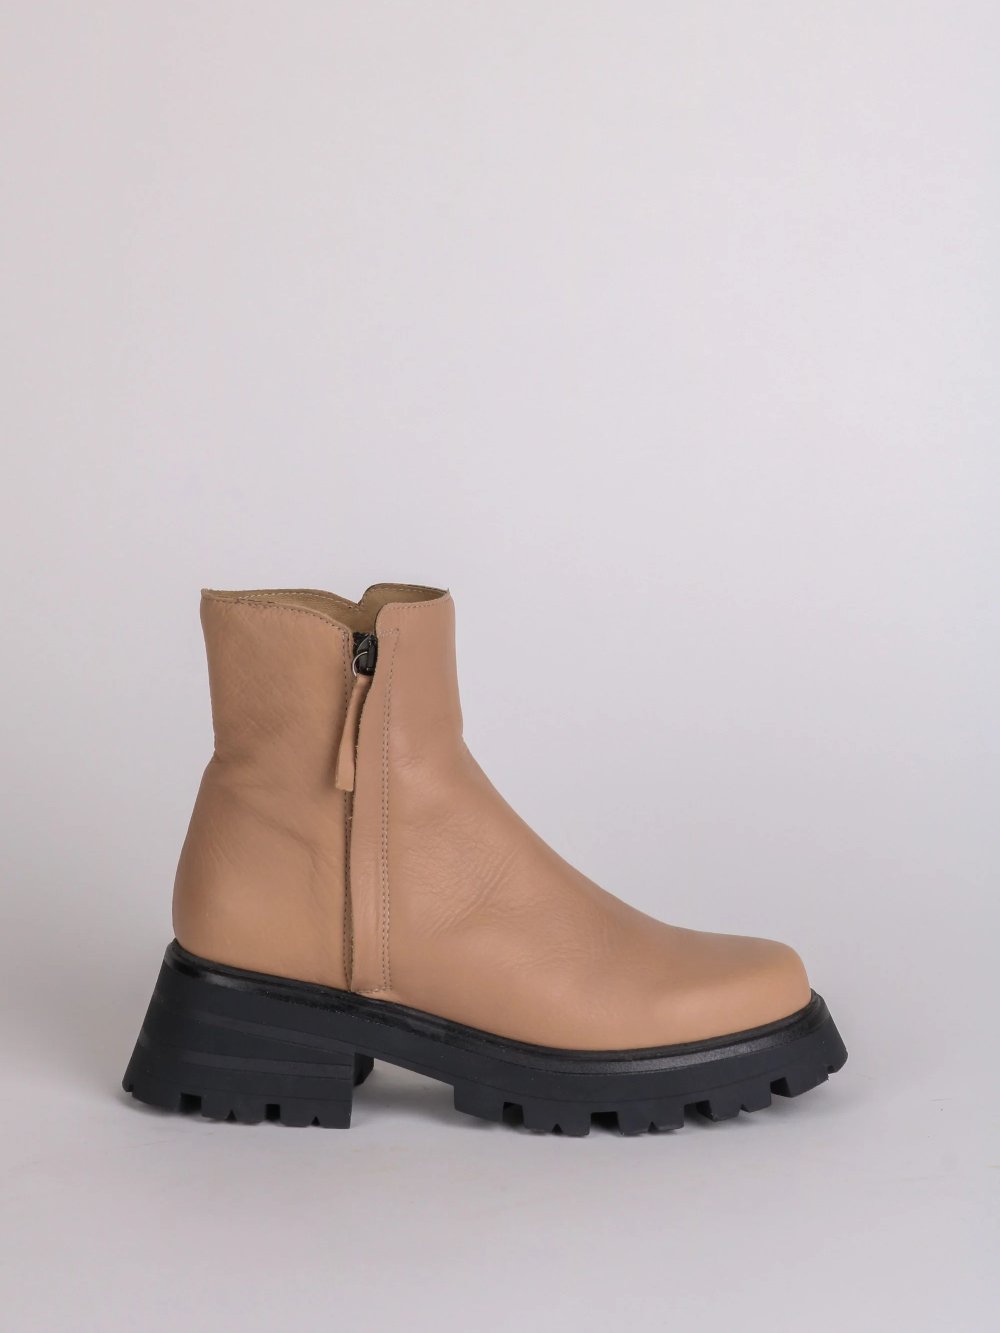 INTENTIONALLY BLANK LARRY LUG SOLE BOOT TAUPE